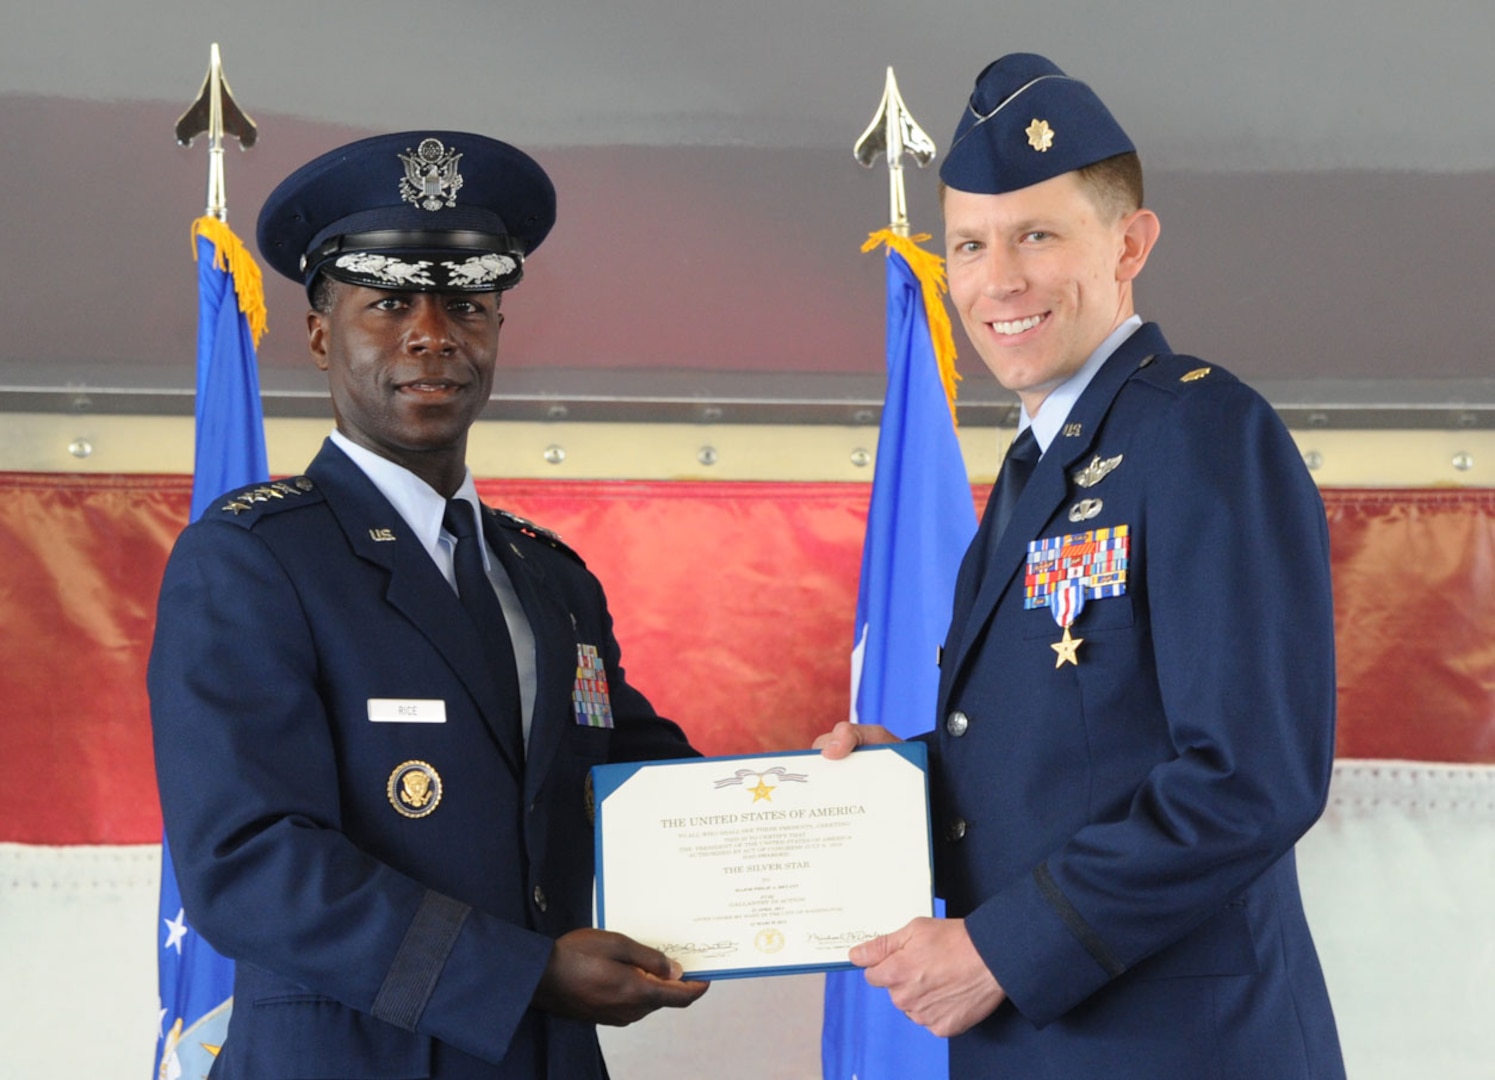 Awarded The Silver Star Joint Base